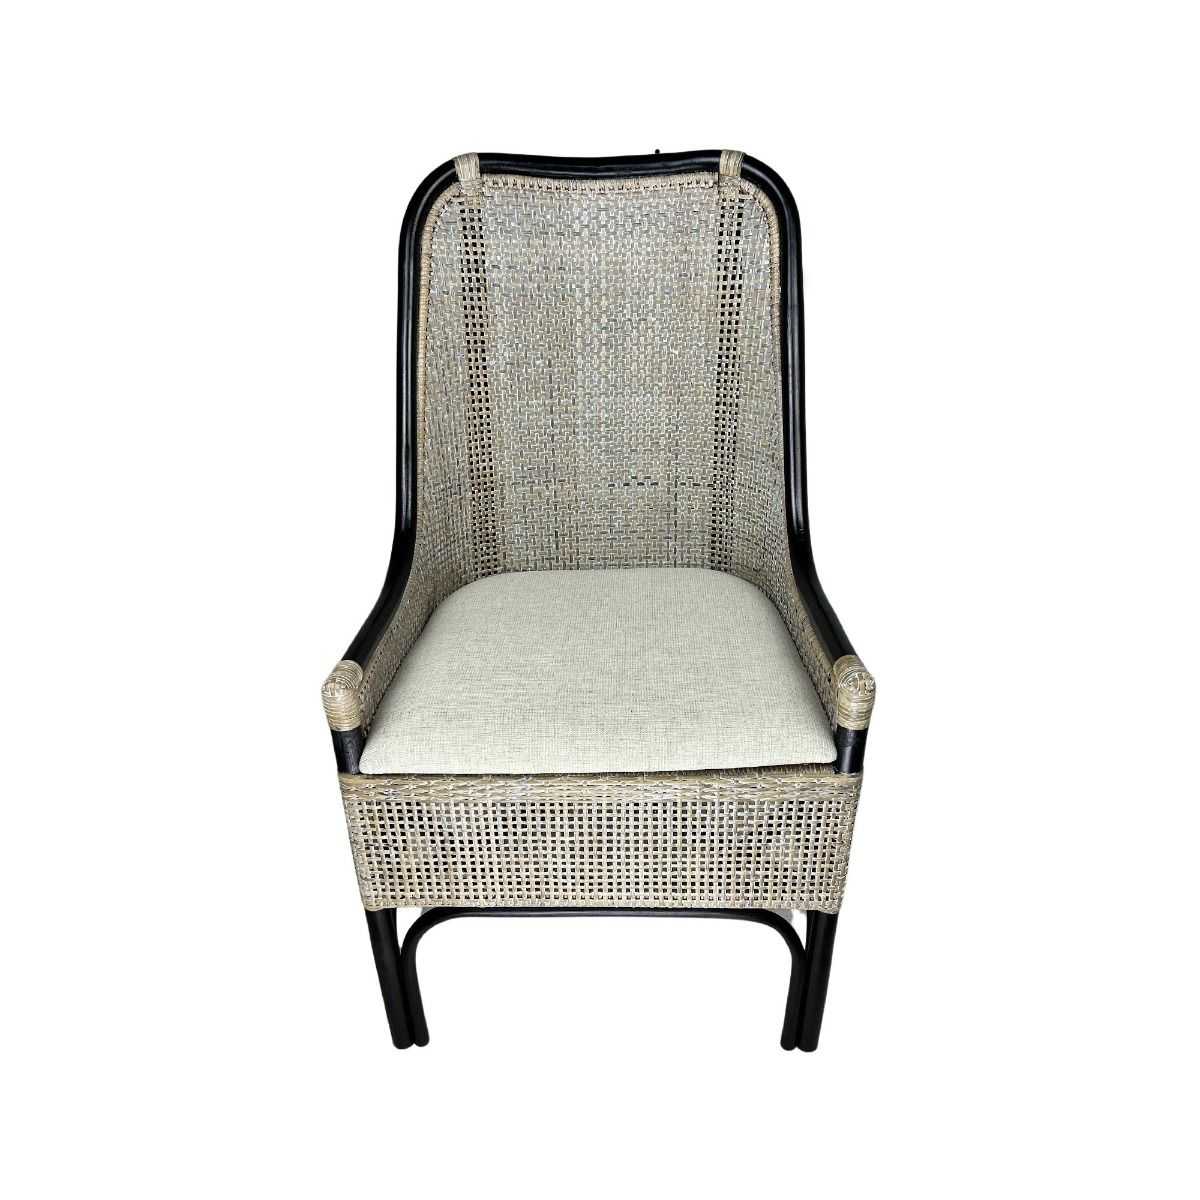 CR Albany Rattan Chair with Cushion